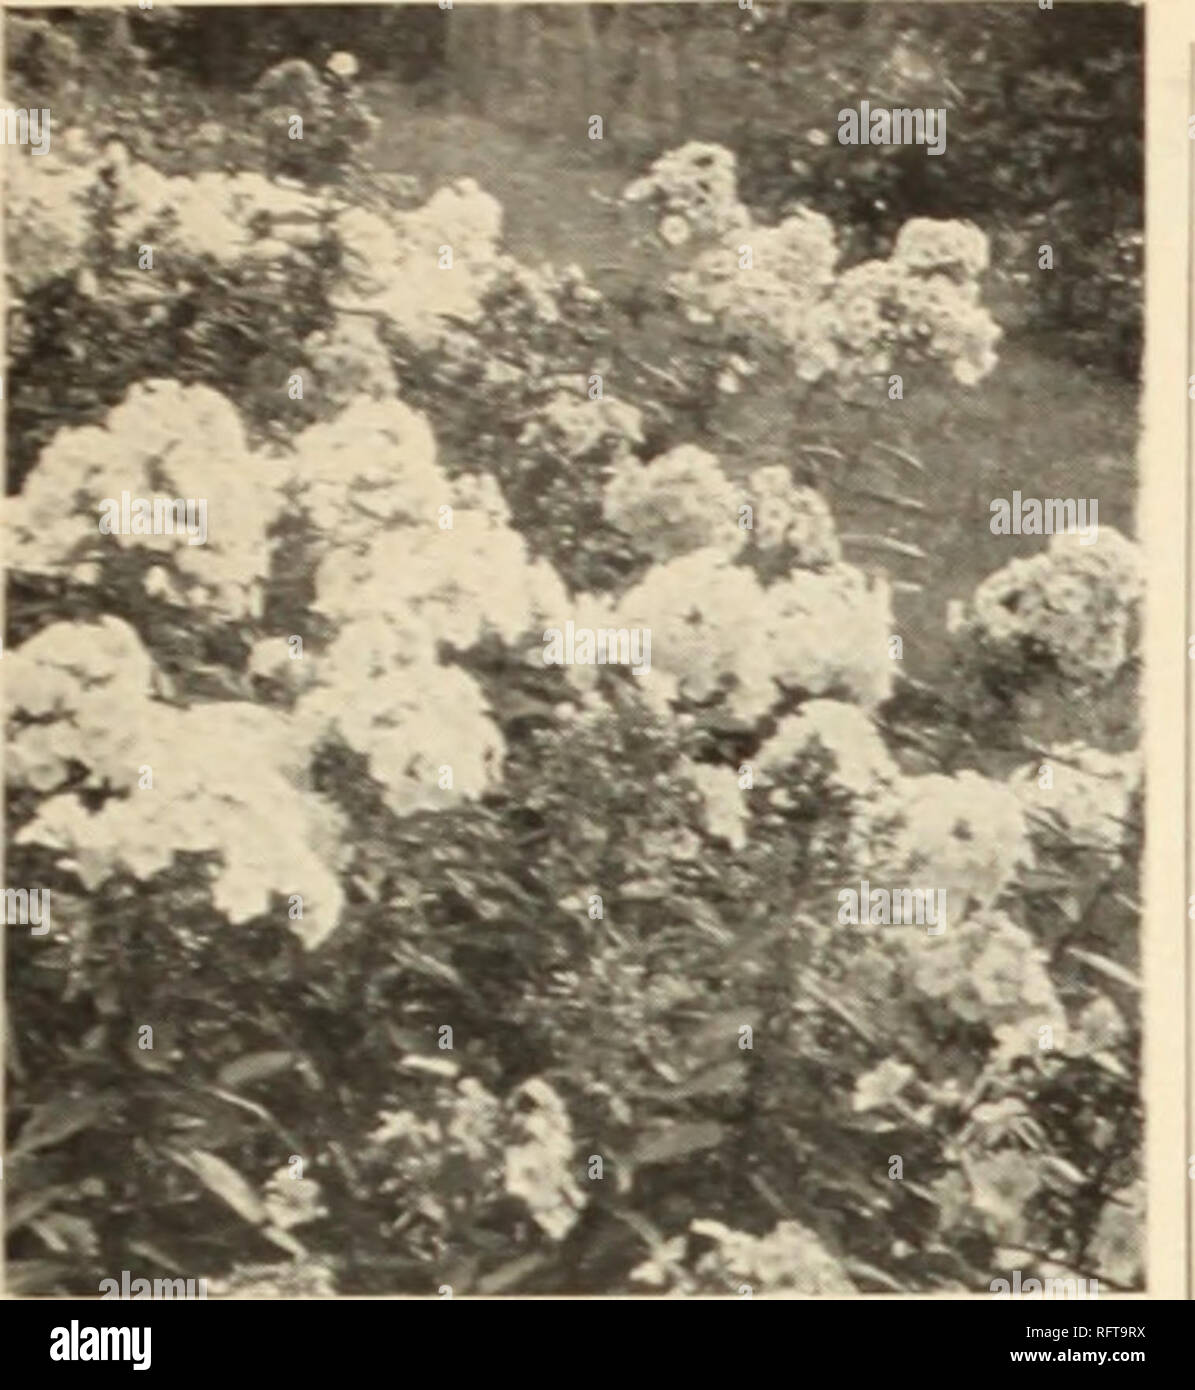 . Capitol city seeds for 1956. Nurseries (Horticulture) Catalogs; Bulbs (Plants) Catalogs; Vegetables Catalogs; Garden tools Catalogs; Seeds Catalogs. You Can Hardly Have a Garden Without Phlox. Shasta Daisies (Chrysanthemum maximum) Hardy Summer Phlox Border Queen. ermelon-pink. Count Zeppelin. •'• ite with r&lt; Lilian. ( mteo-pink with blue it-. 2 It. Mary Louise. it. Pinkette. V te tinted pink. 2 Rosy Blue. .vender. 2 ft. Ruth May. - .. jbs Ladder). 12 in. A dwarf Polemonium with great clusters of light blue flowers. Graceful foliage. May. Rudbeckia (Coneflower) Purpurea, The King. 1 ar Stock Photo